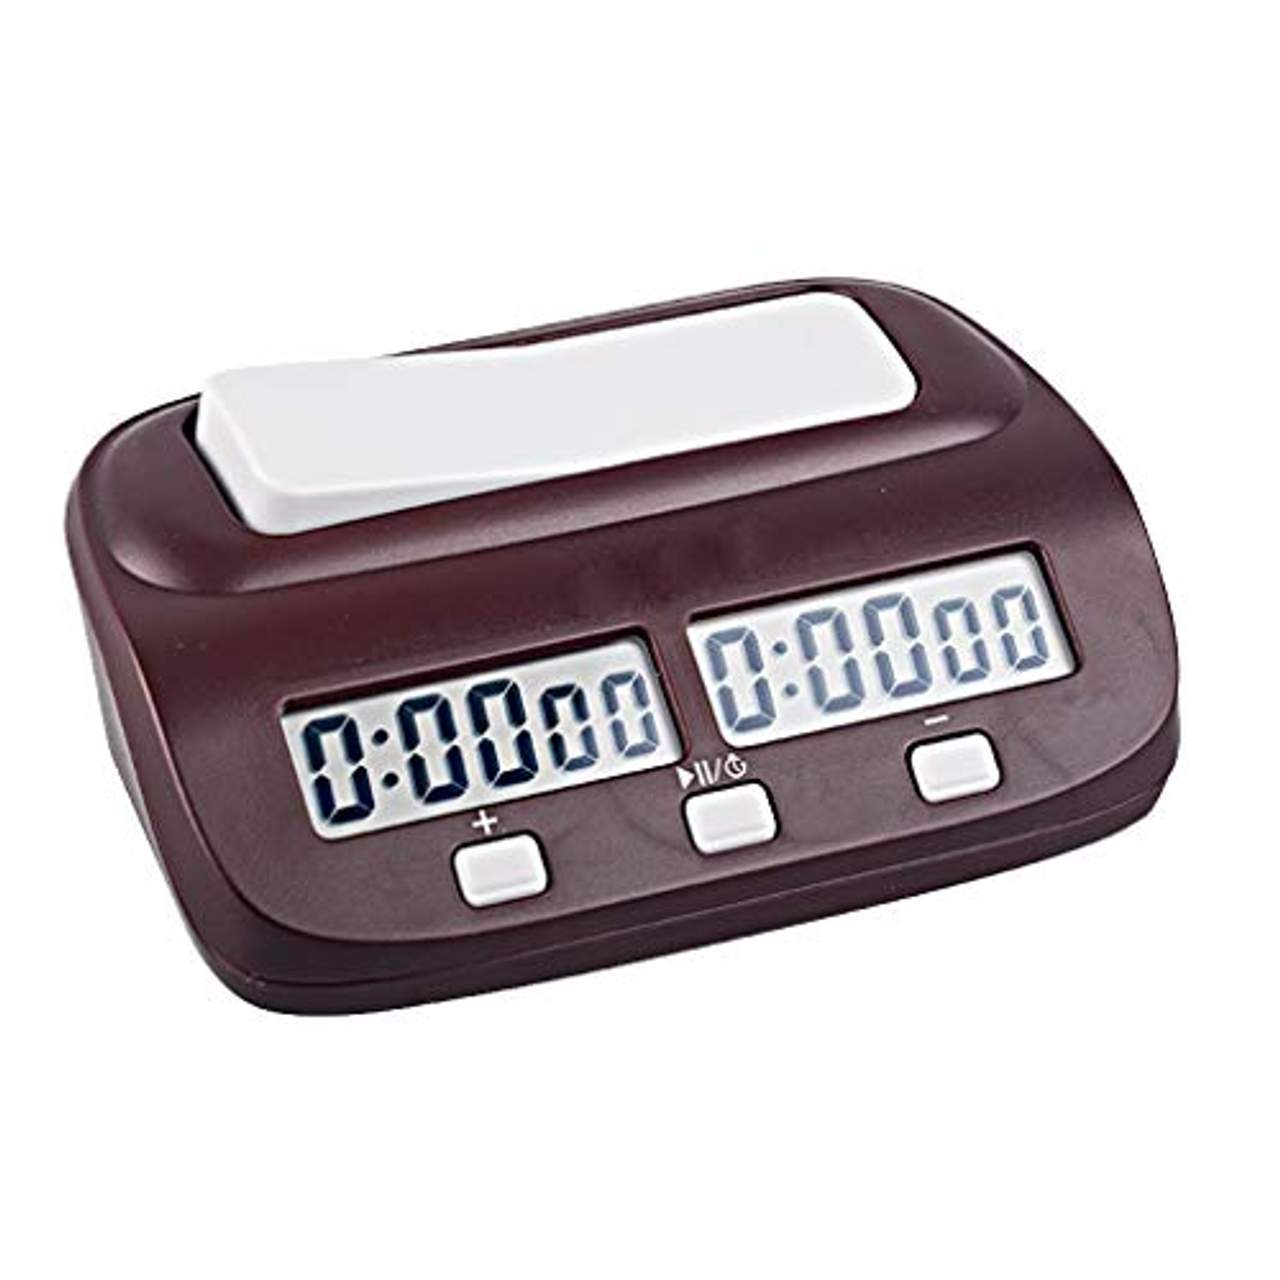 Fornateu Professionelle Digitale Schachuhr Count Up Down Timer